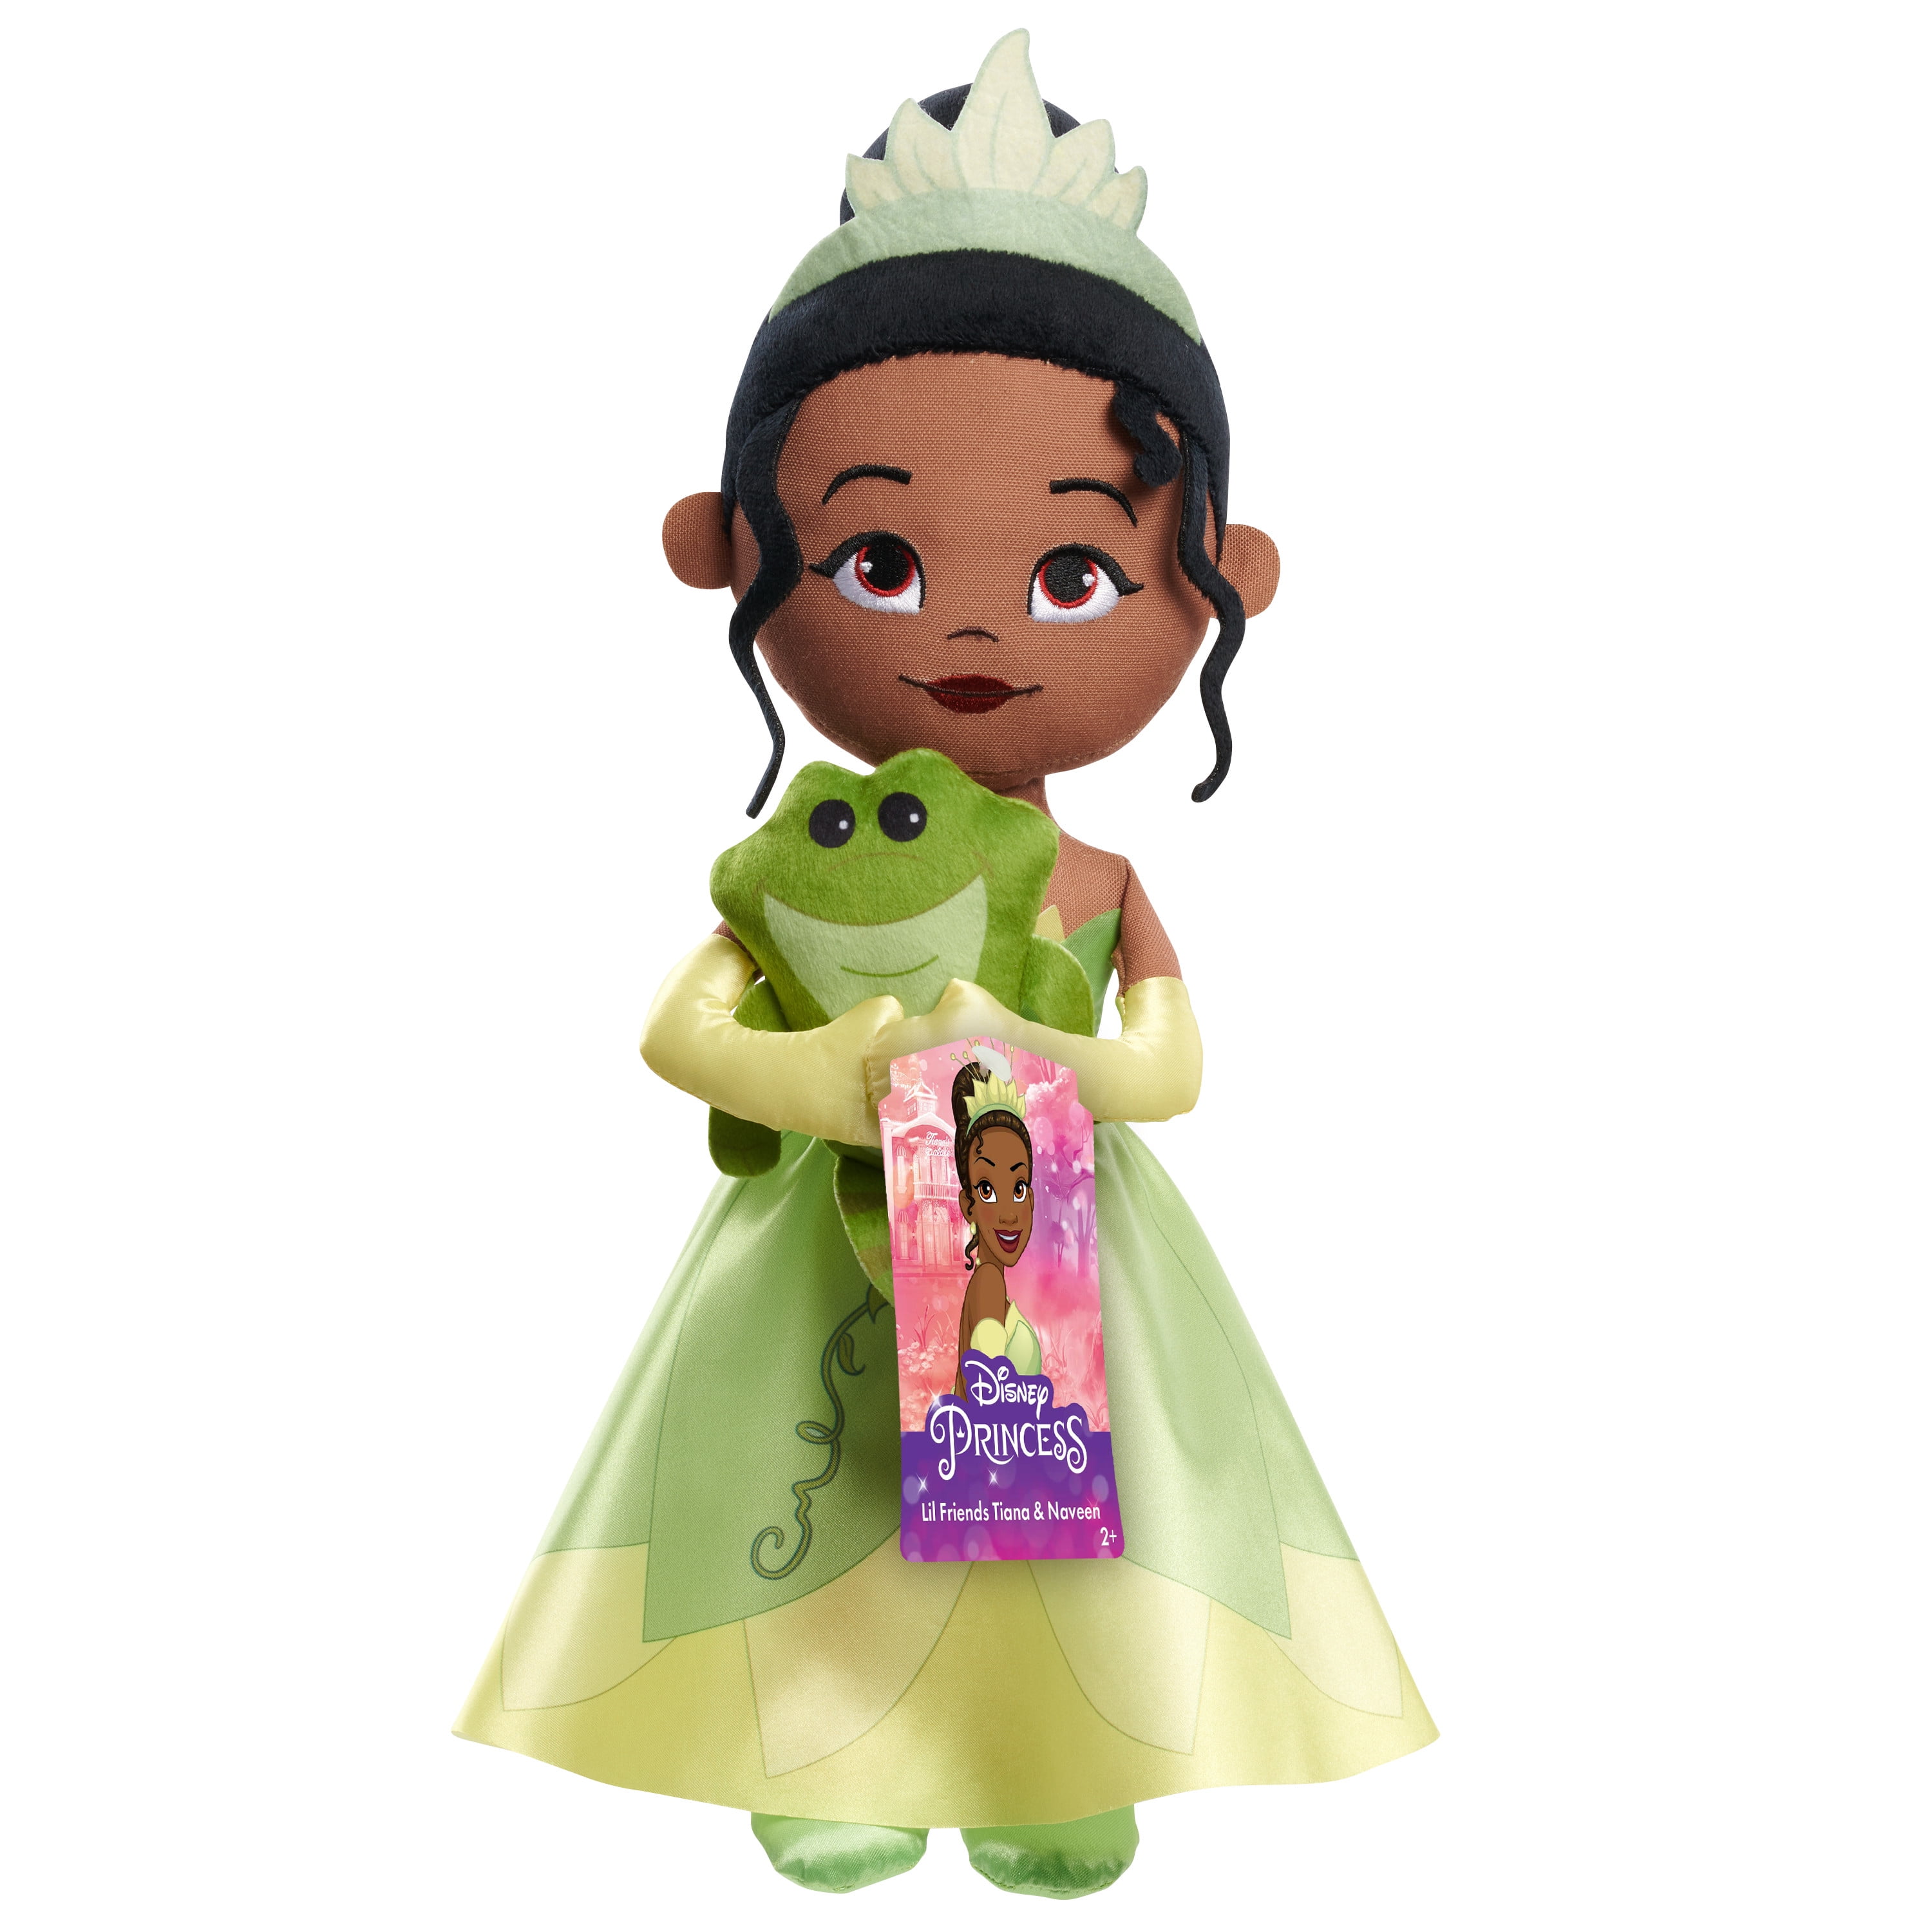 Disney Princess Lil' Friends Plushie Tiana & Naveen 14.5-inch Plushie Doll,  Officially Licensed Kids Toys for Ages 3 Up, Gifts and Presents 